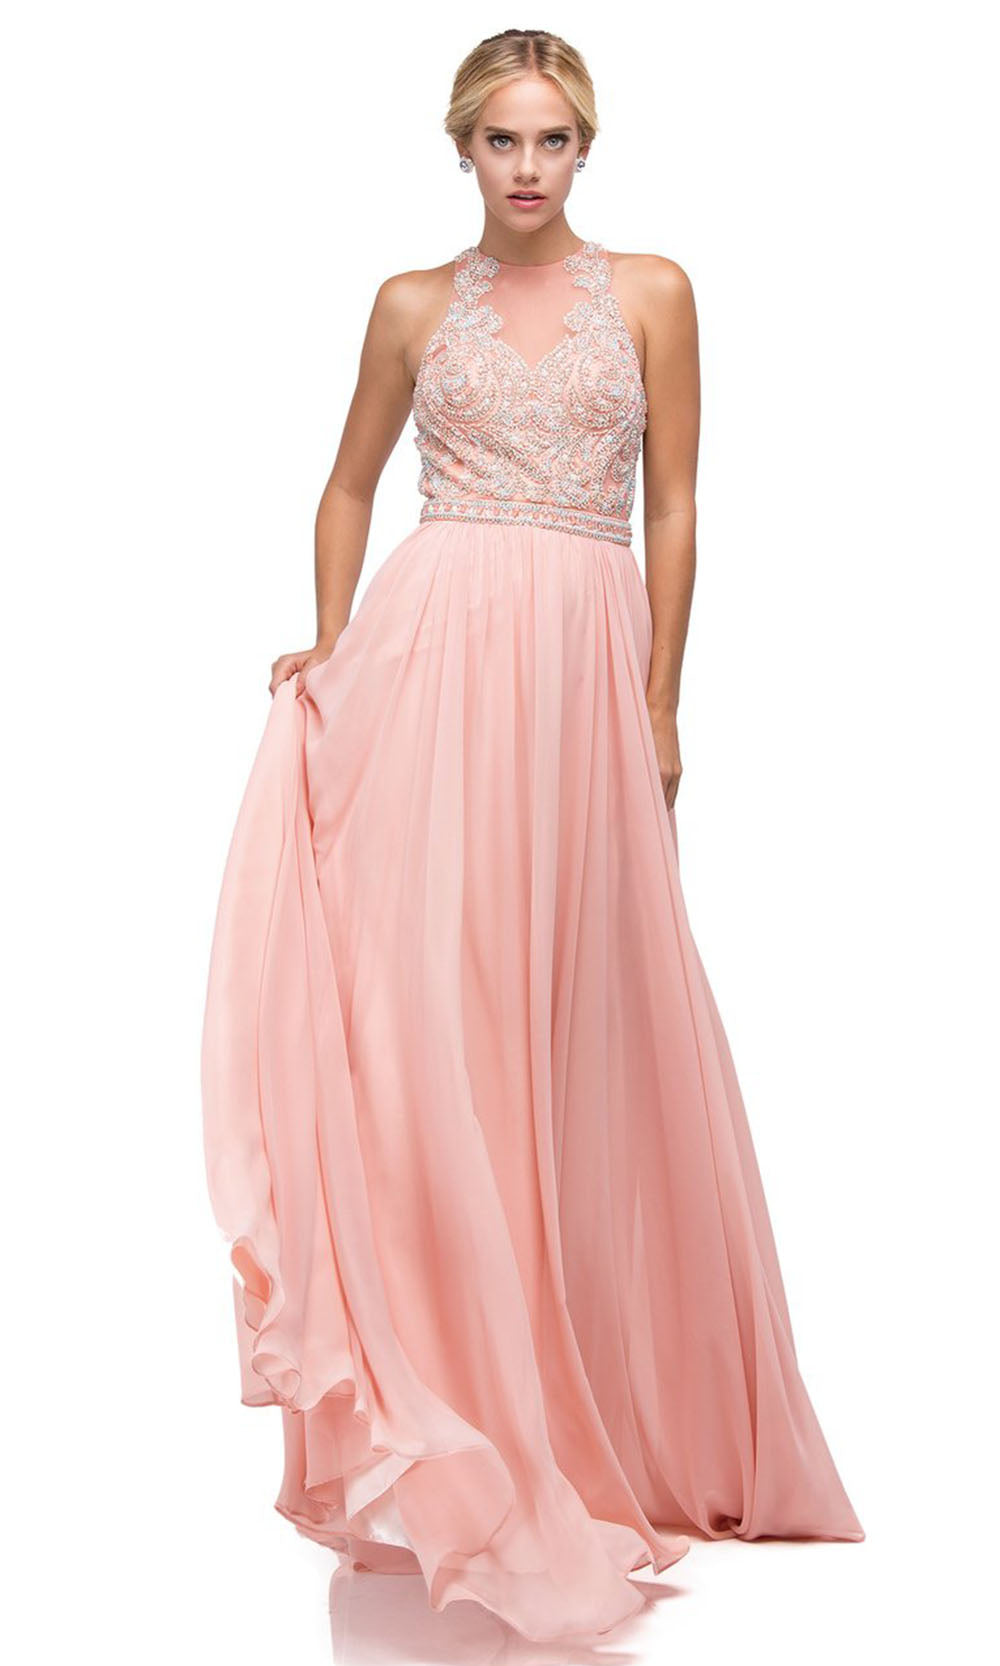 Dancing Queen - 9689 Embroidered Halter Neck A-Line Dress In Pink